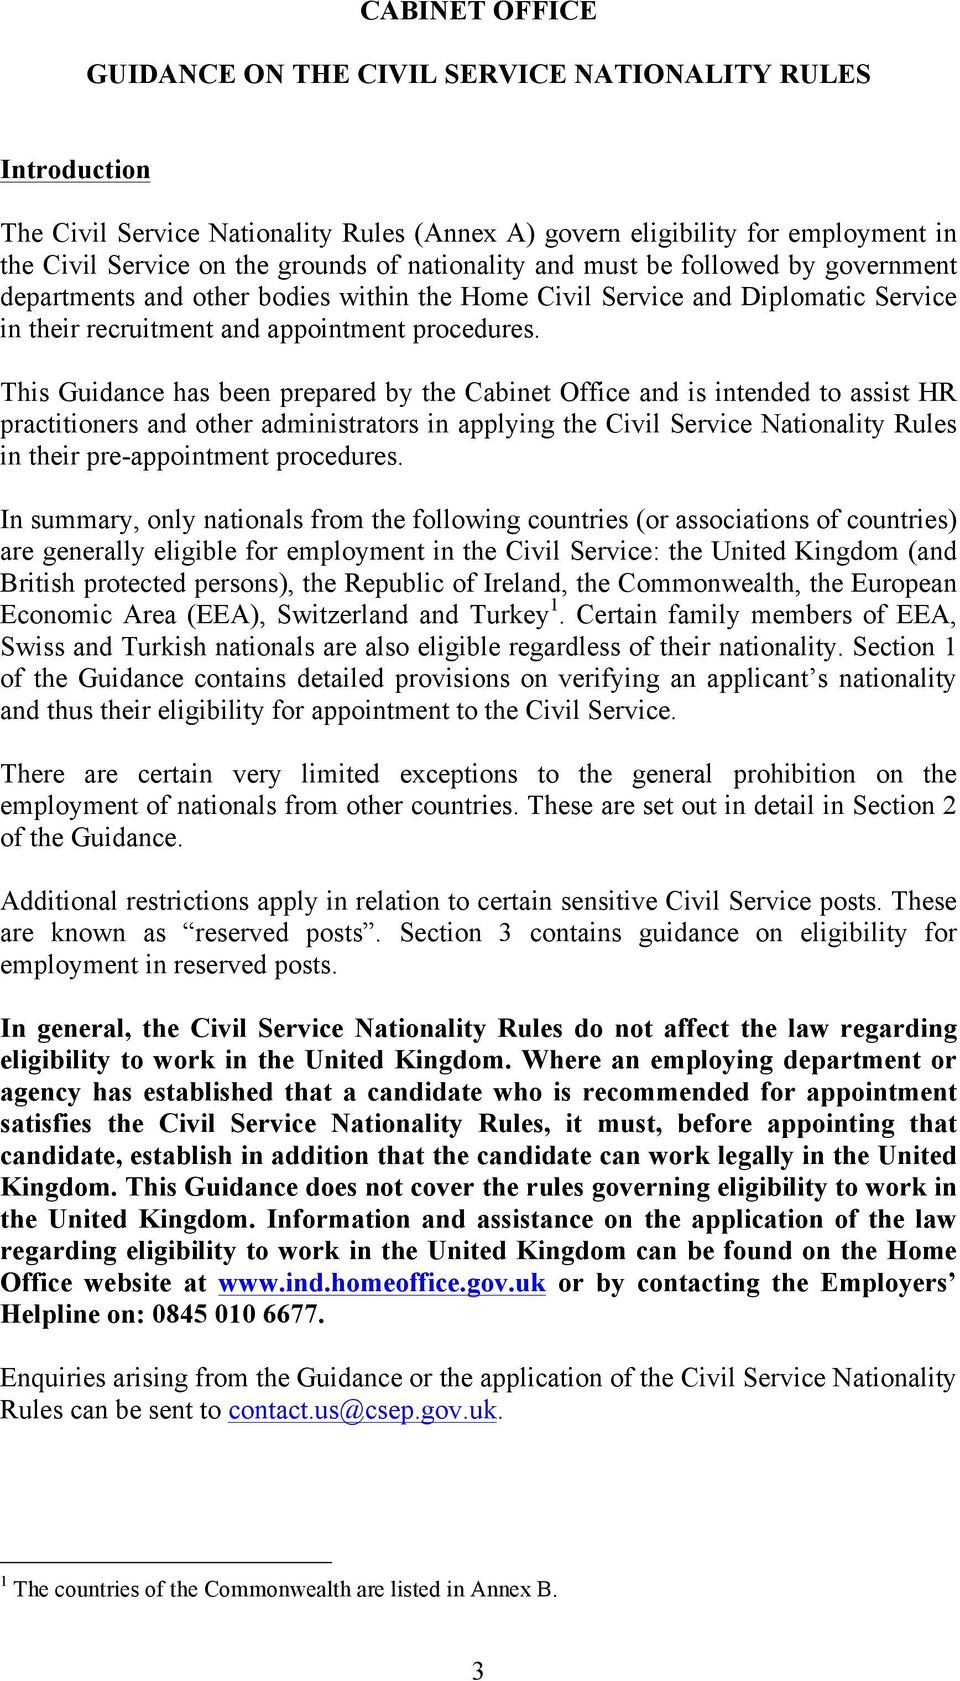 This Guidance has been prepared by the Cabinet Office and is intended to assist HR practitioners and other administrators in applying the Civil Service Nationality Rules in their pre-appointment